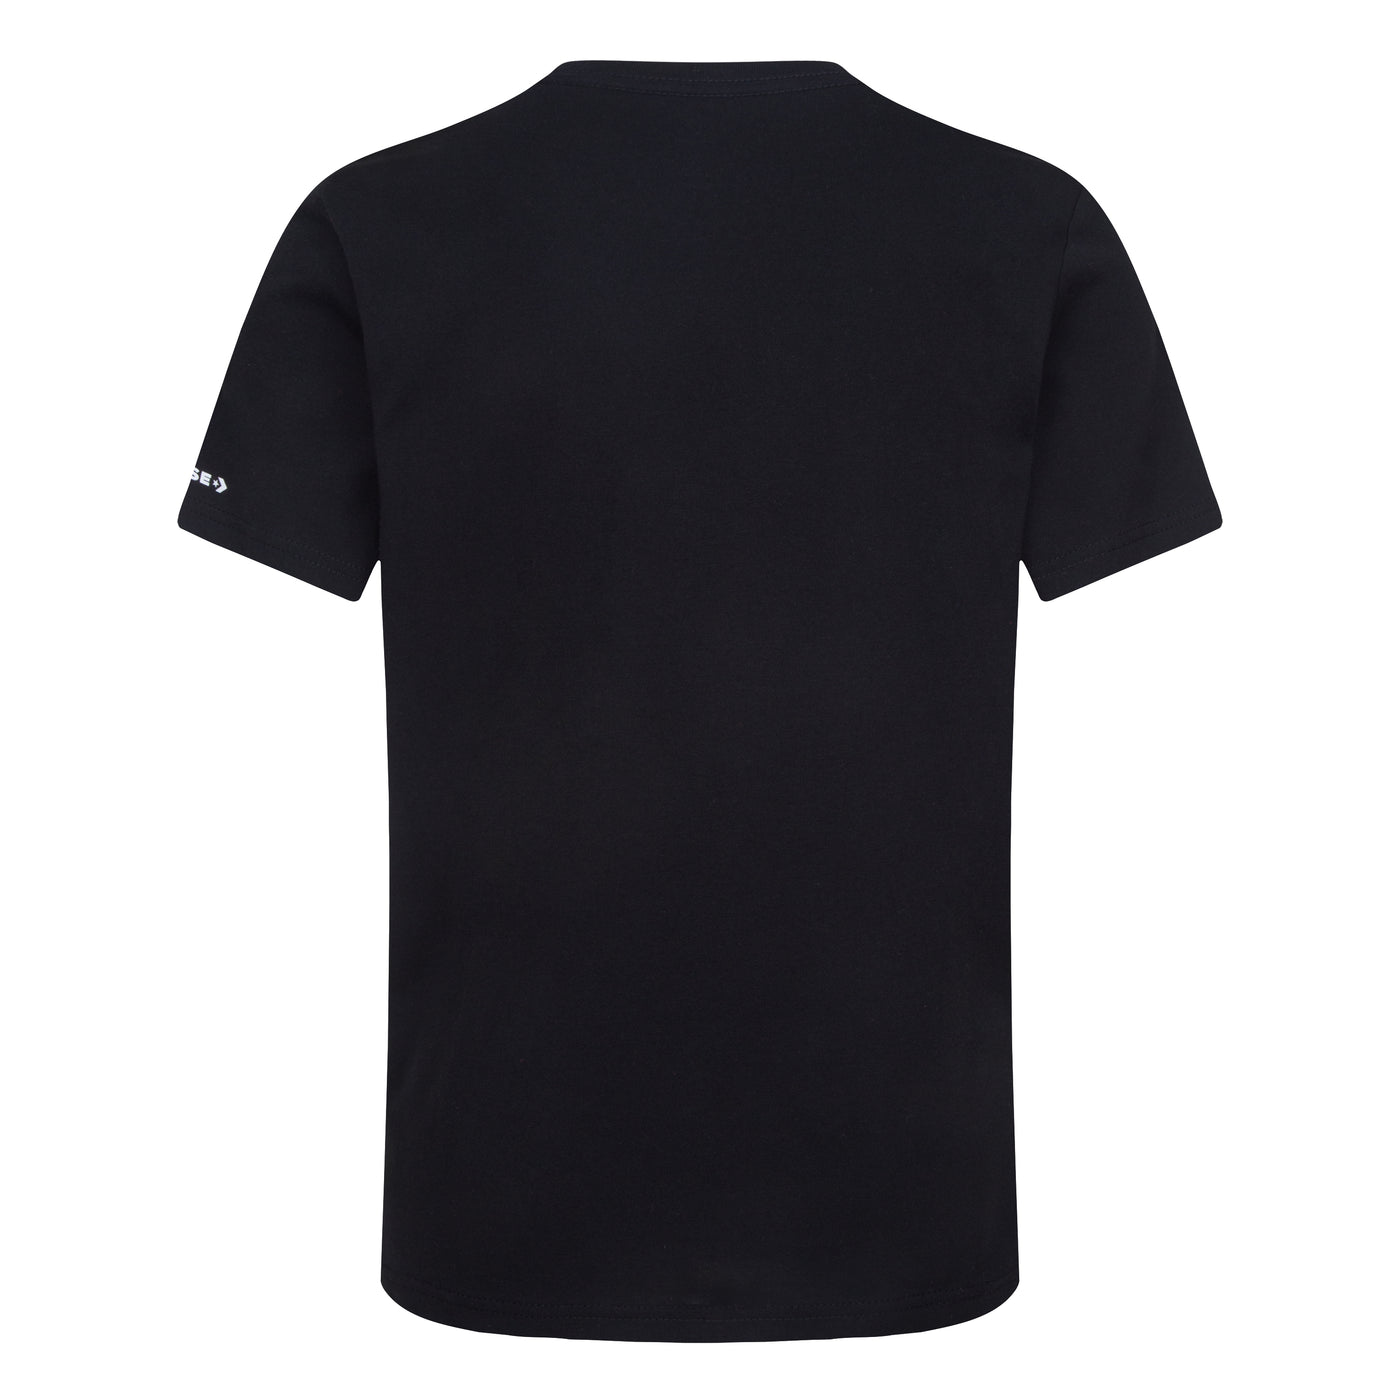 converse black dissected ctp color tee T Shirt Converse   